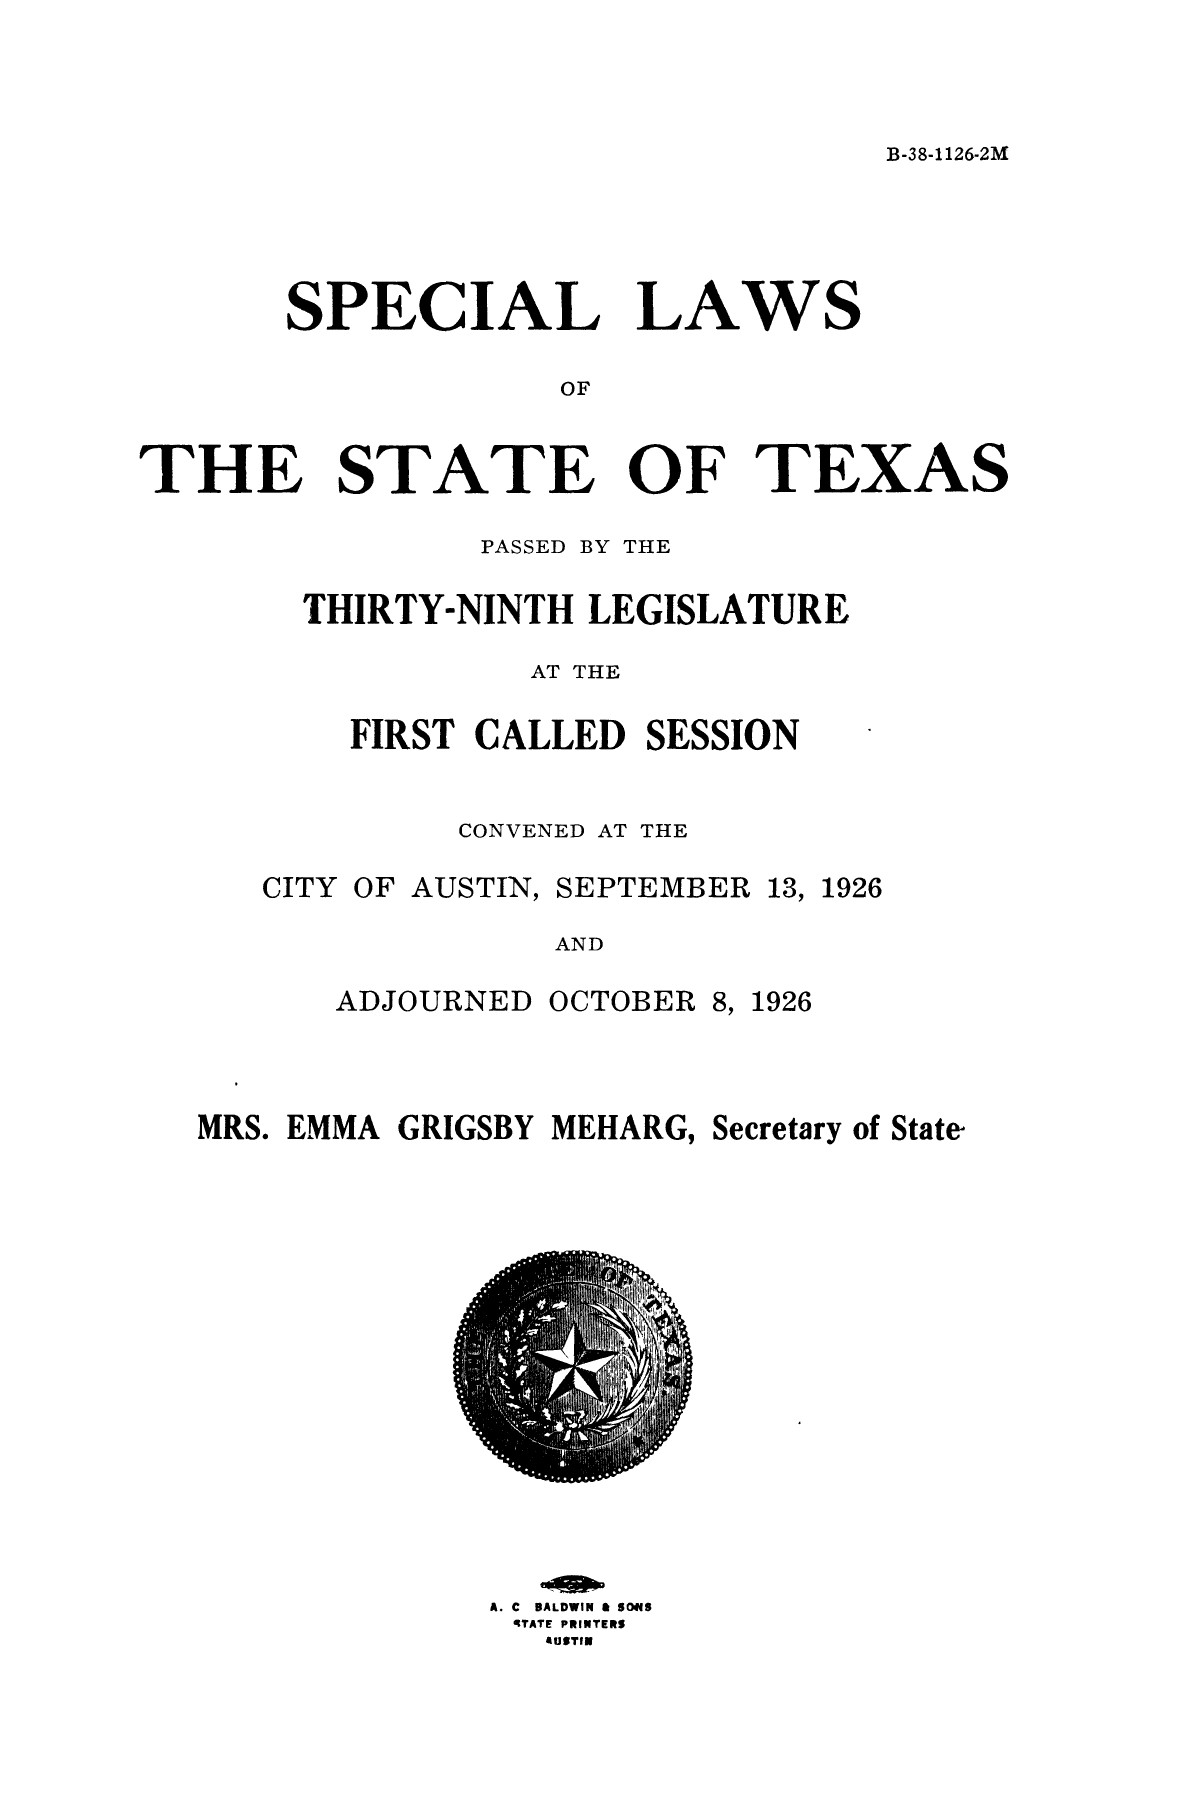 The Laws of Texas, 1926 [Volume 24]
                                                
                                                    [Sequence #]: 3 of 1784
                                                